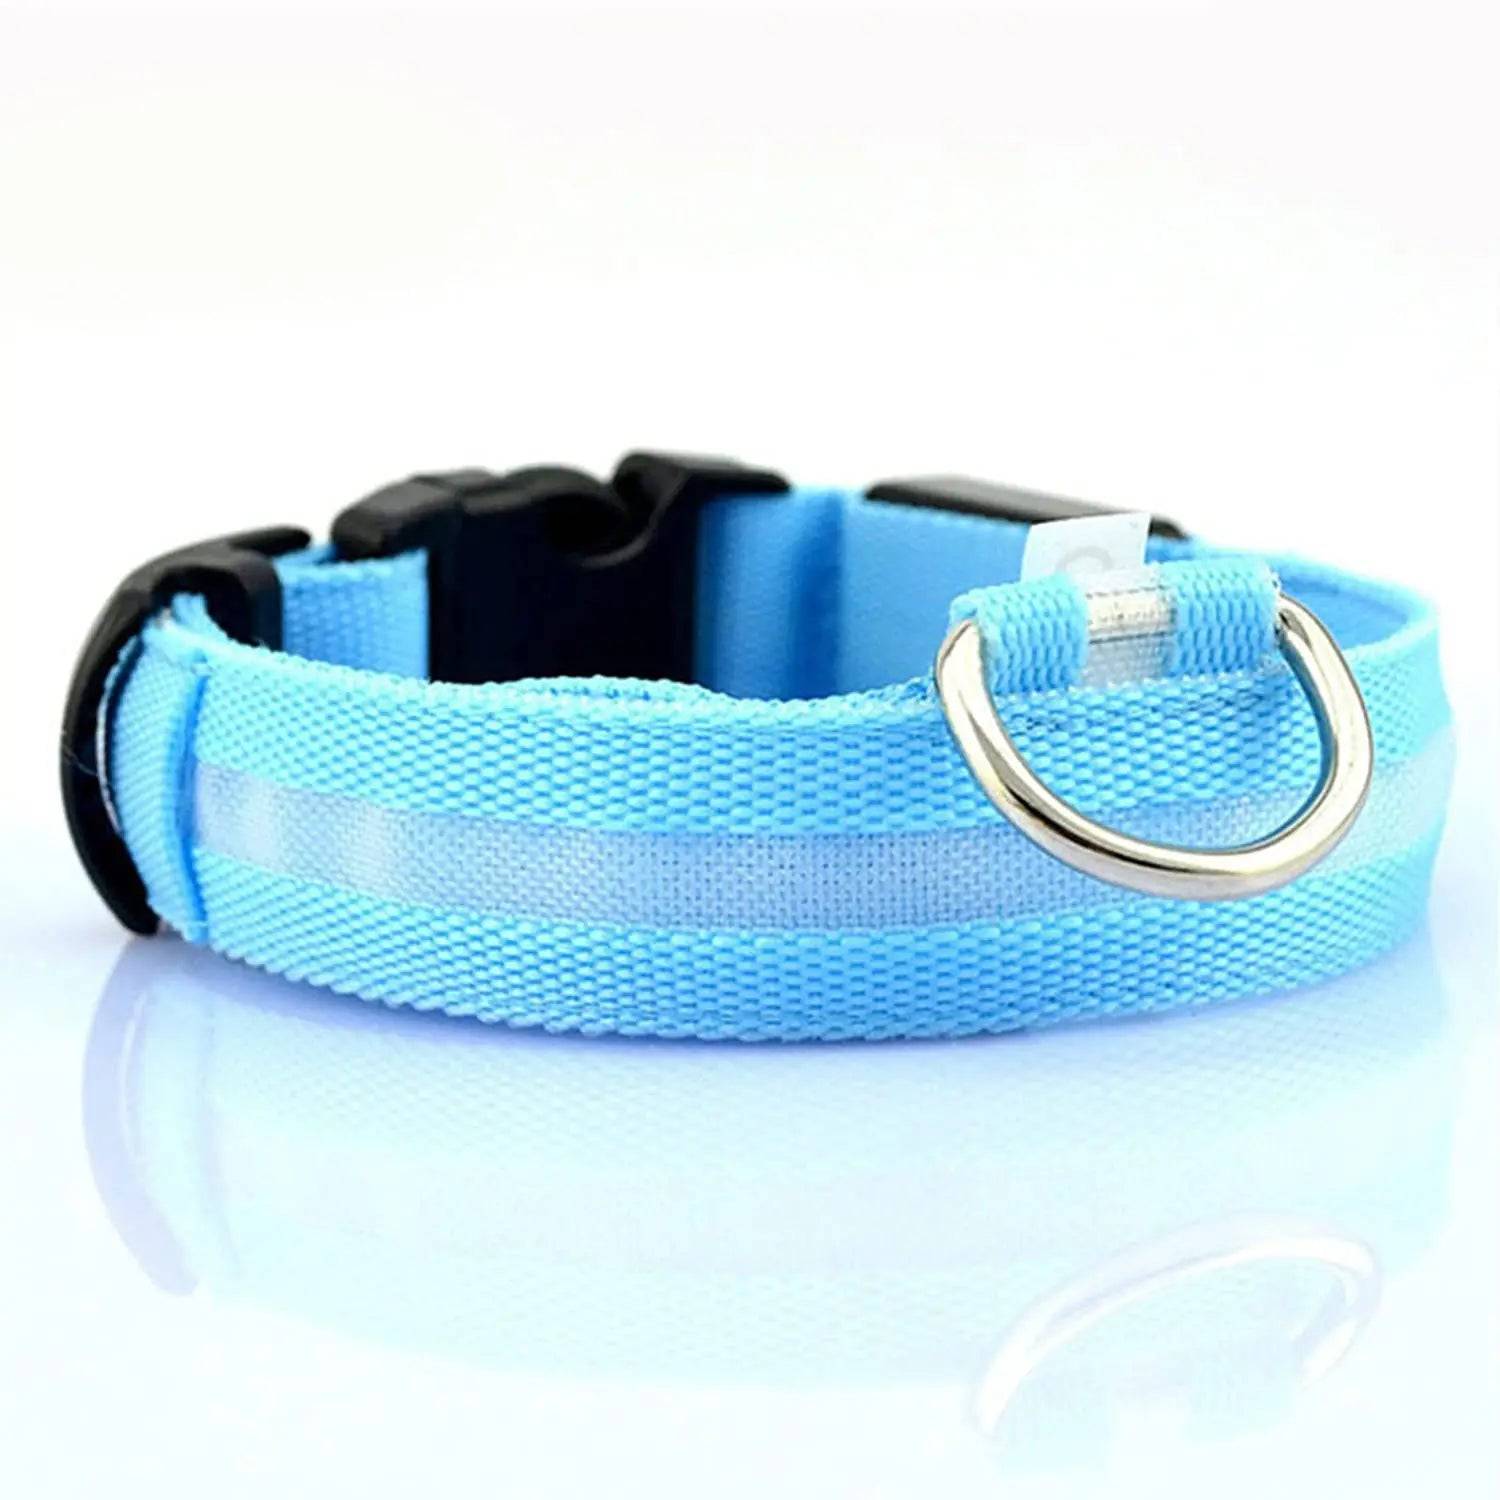 GlowGuard LED Dog Collar: Keep Your Pet Safe and Stylish in the Dark Blue battery / XS neck 28-40cm - IHavePaws